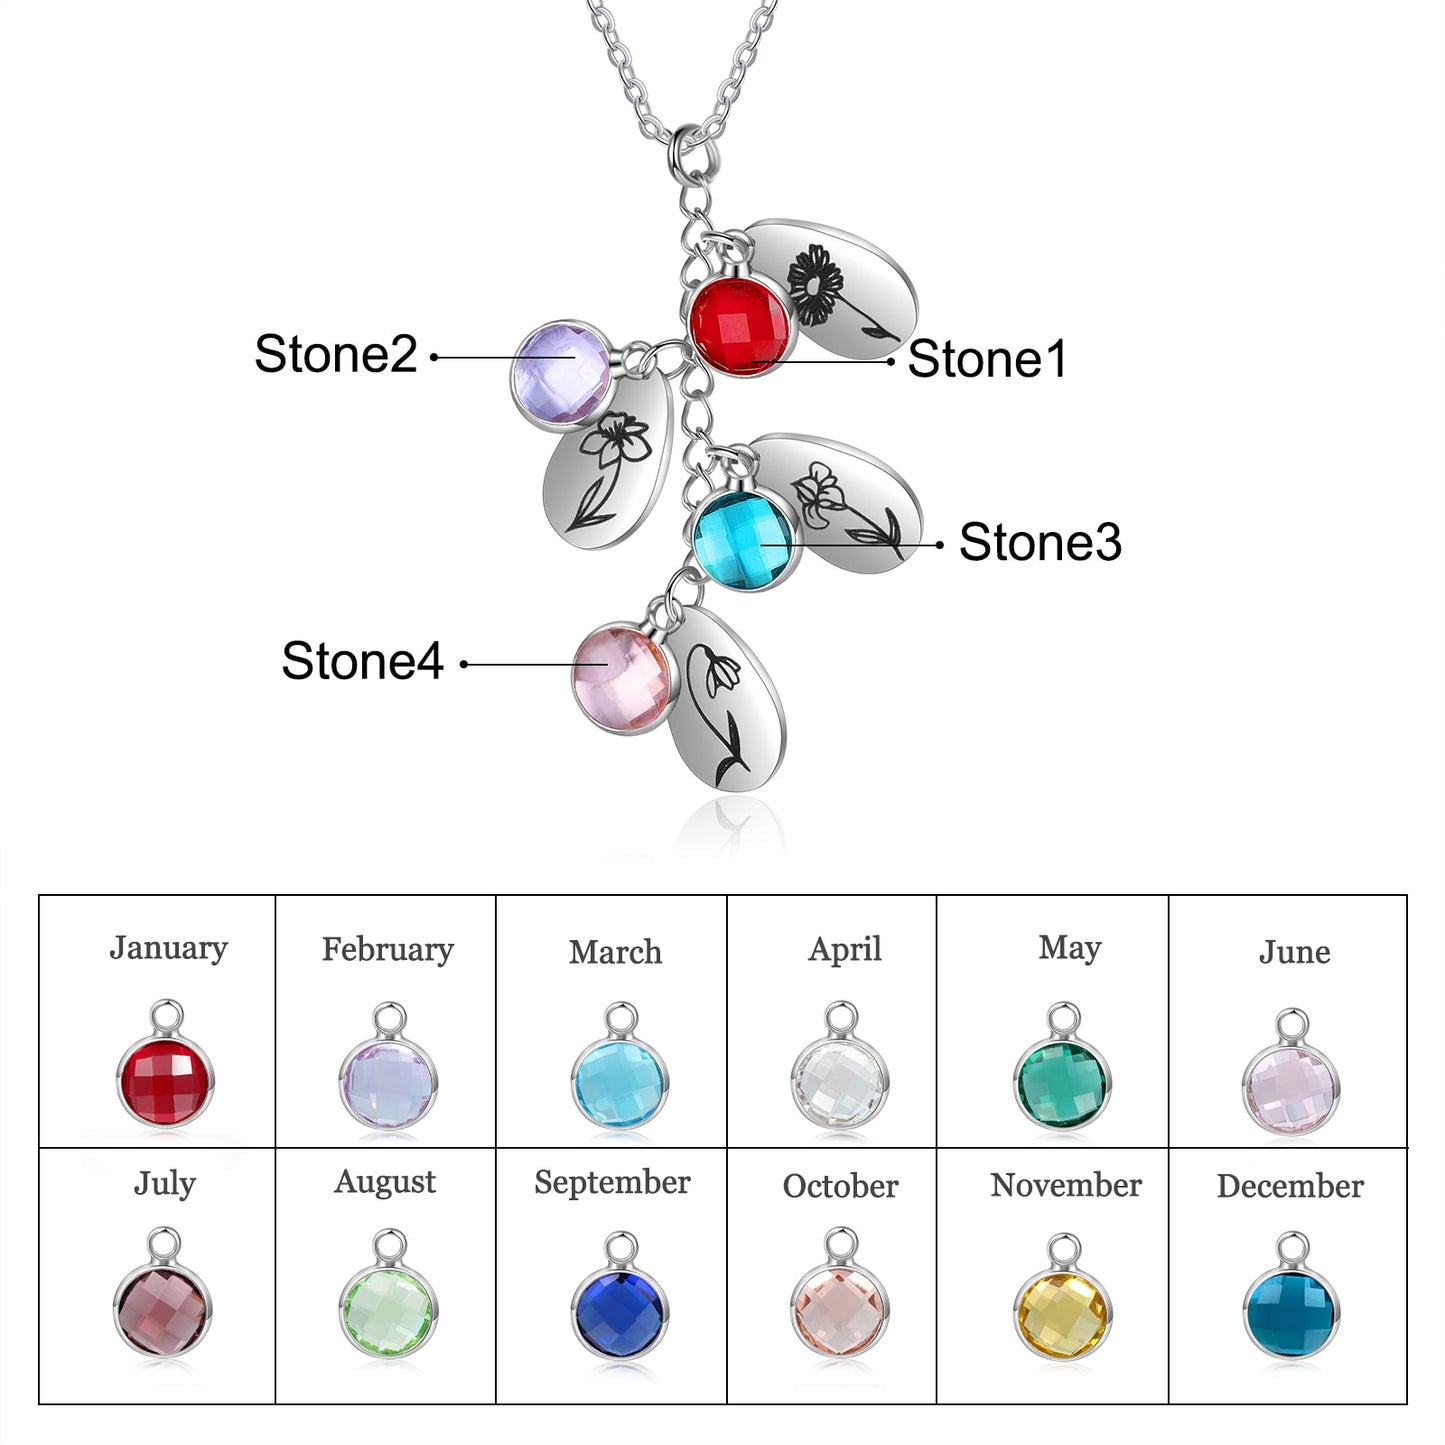 New Personalized Birth Flower Pendant Jewelry Customized 4 Birthstones Water Drop shaped Necklaces for Women Gifts